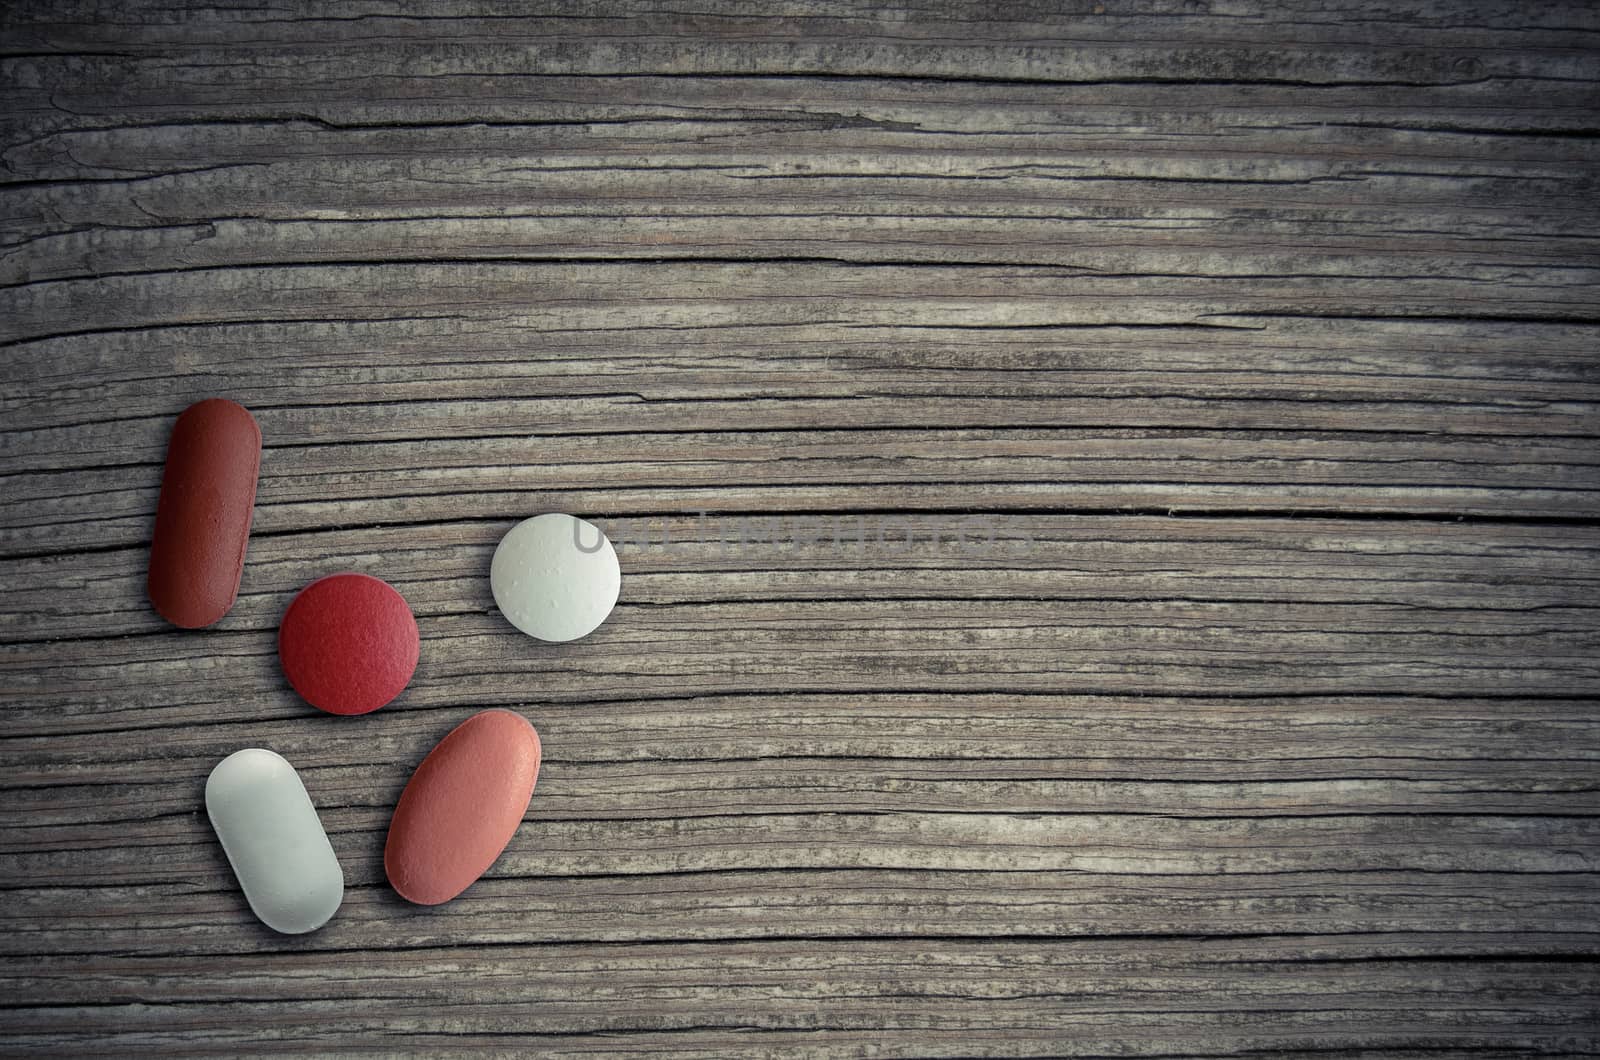 Healthcare Image Of Assorted Pills On A Wooden Table